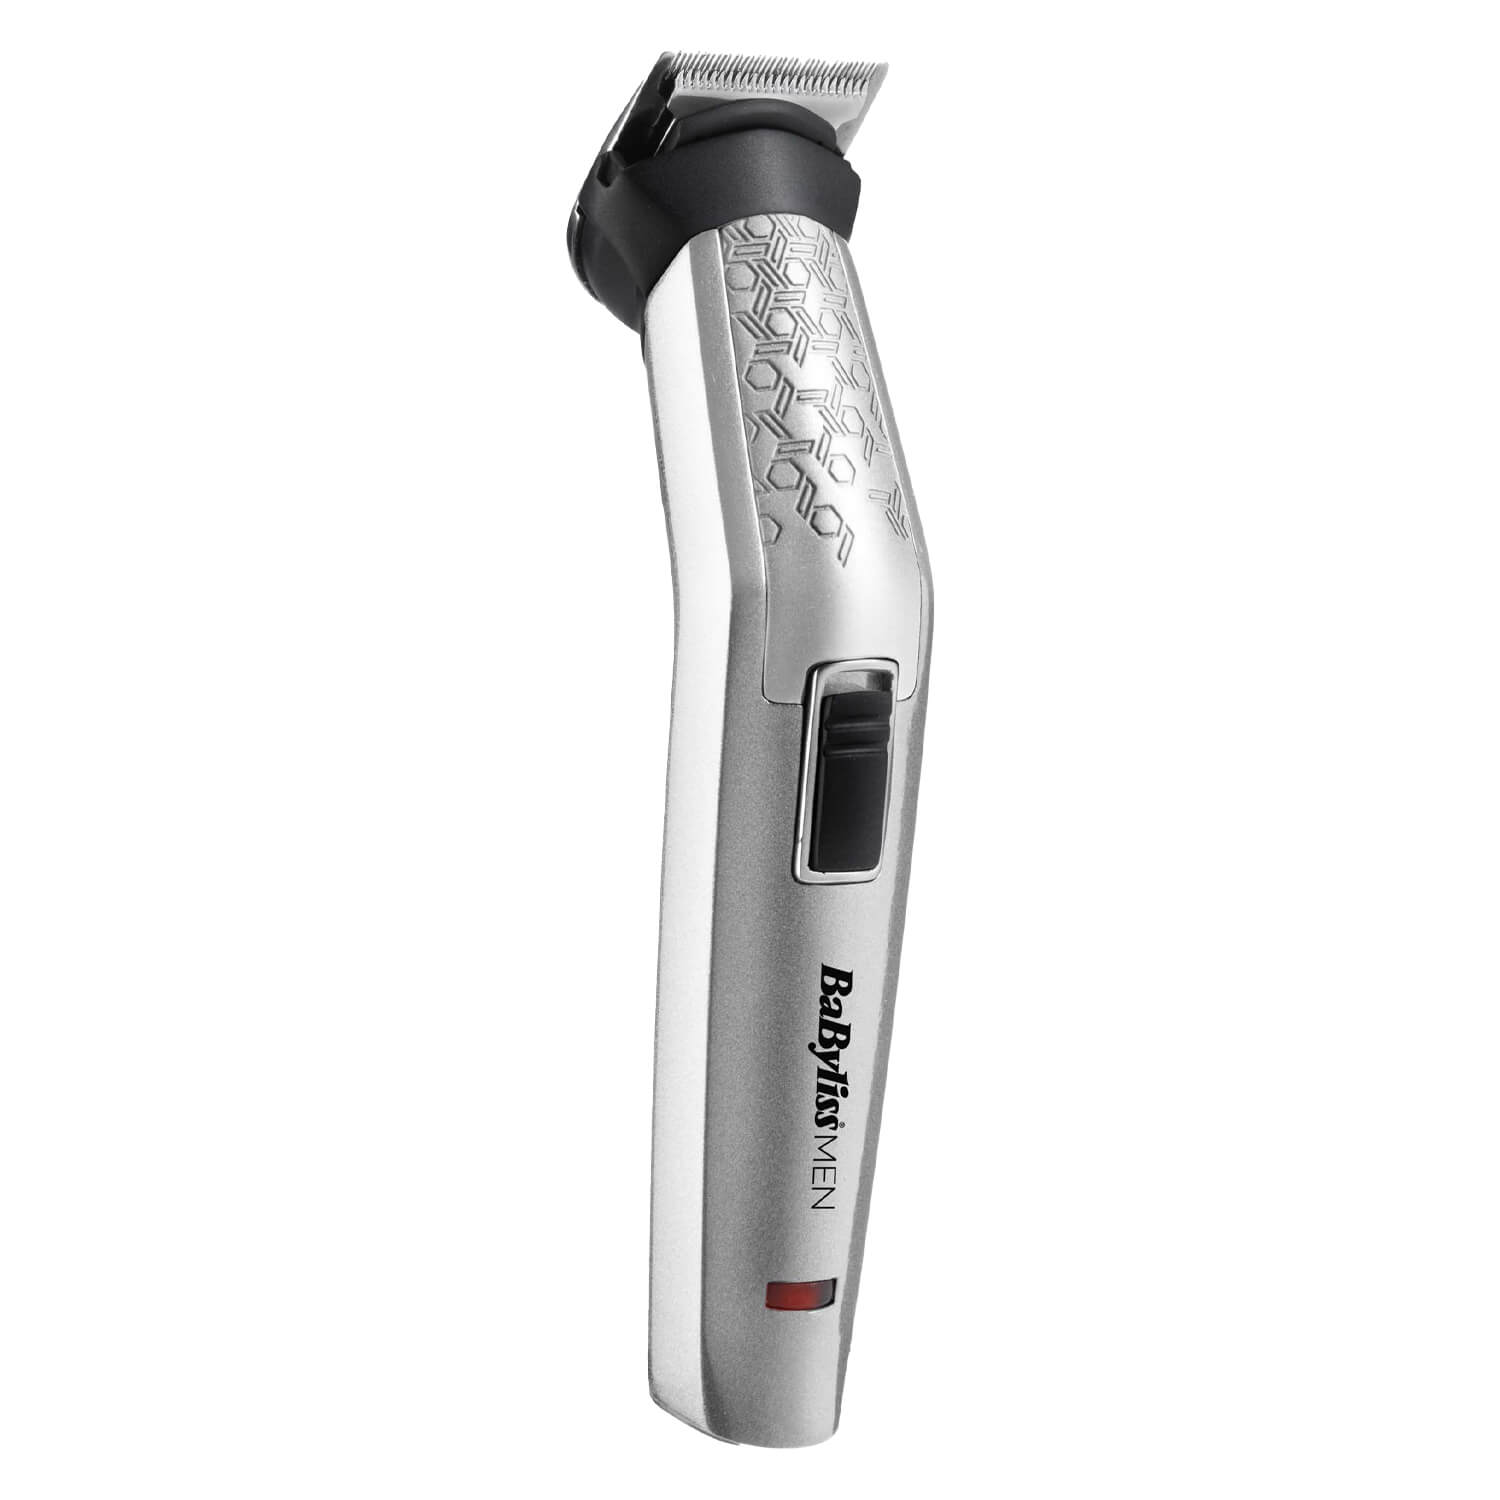 BaByliss MEN - 7256PE Steel Edition Trimmer The 11 1 in Multi